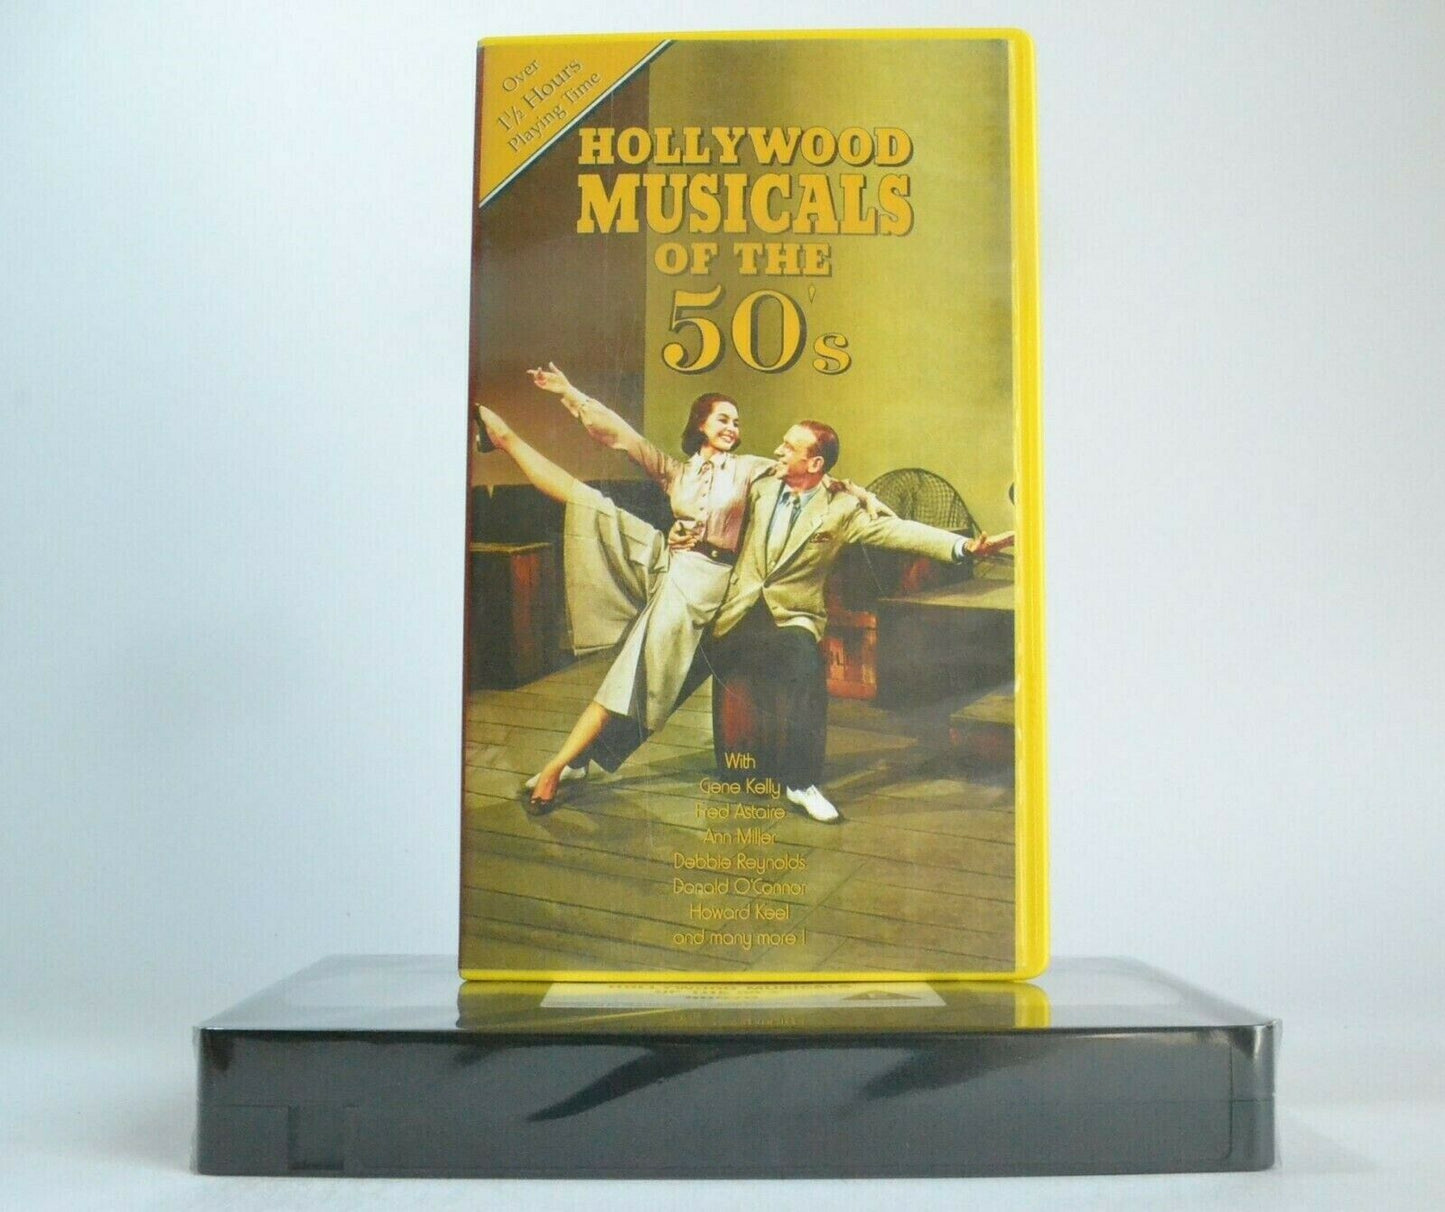 Hollywood Musicals Of The 50's: Brand New Sealed - Gene Kelly/Fred Astaire - VHS-